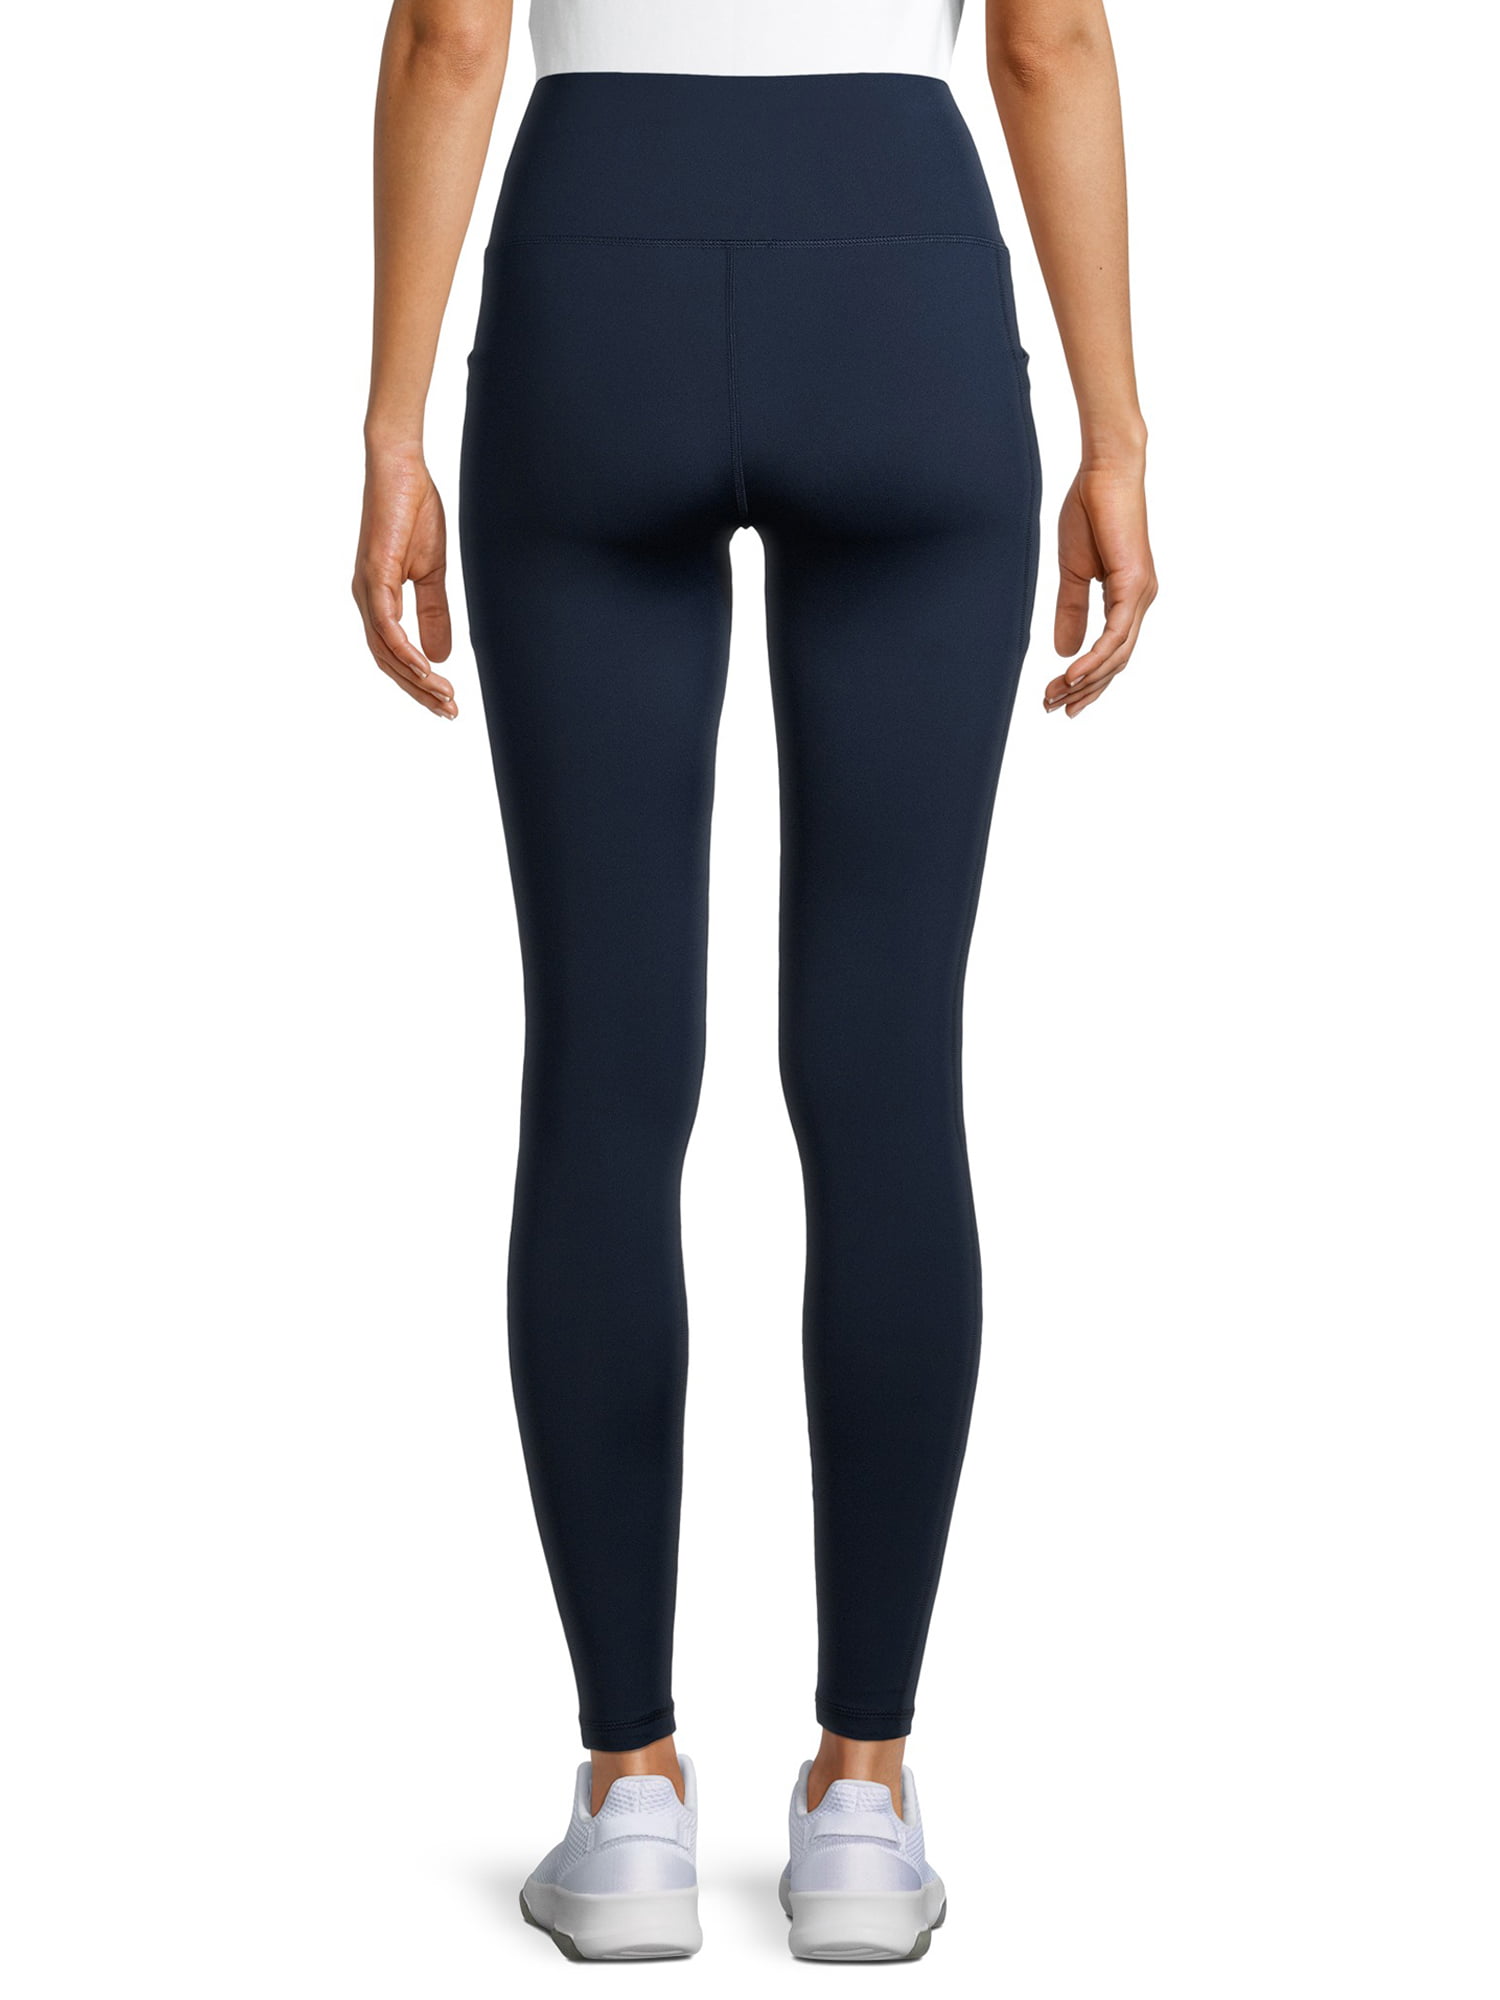 Avia Moisture Wick Leggings Multiple Size XXL - $15 New With Tags - From  Lauren